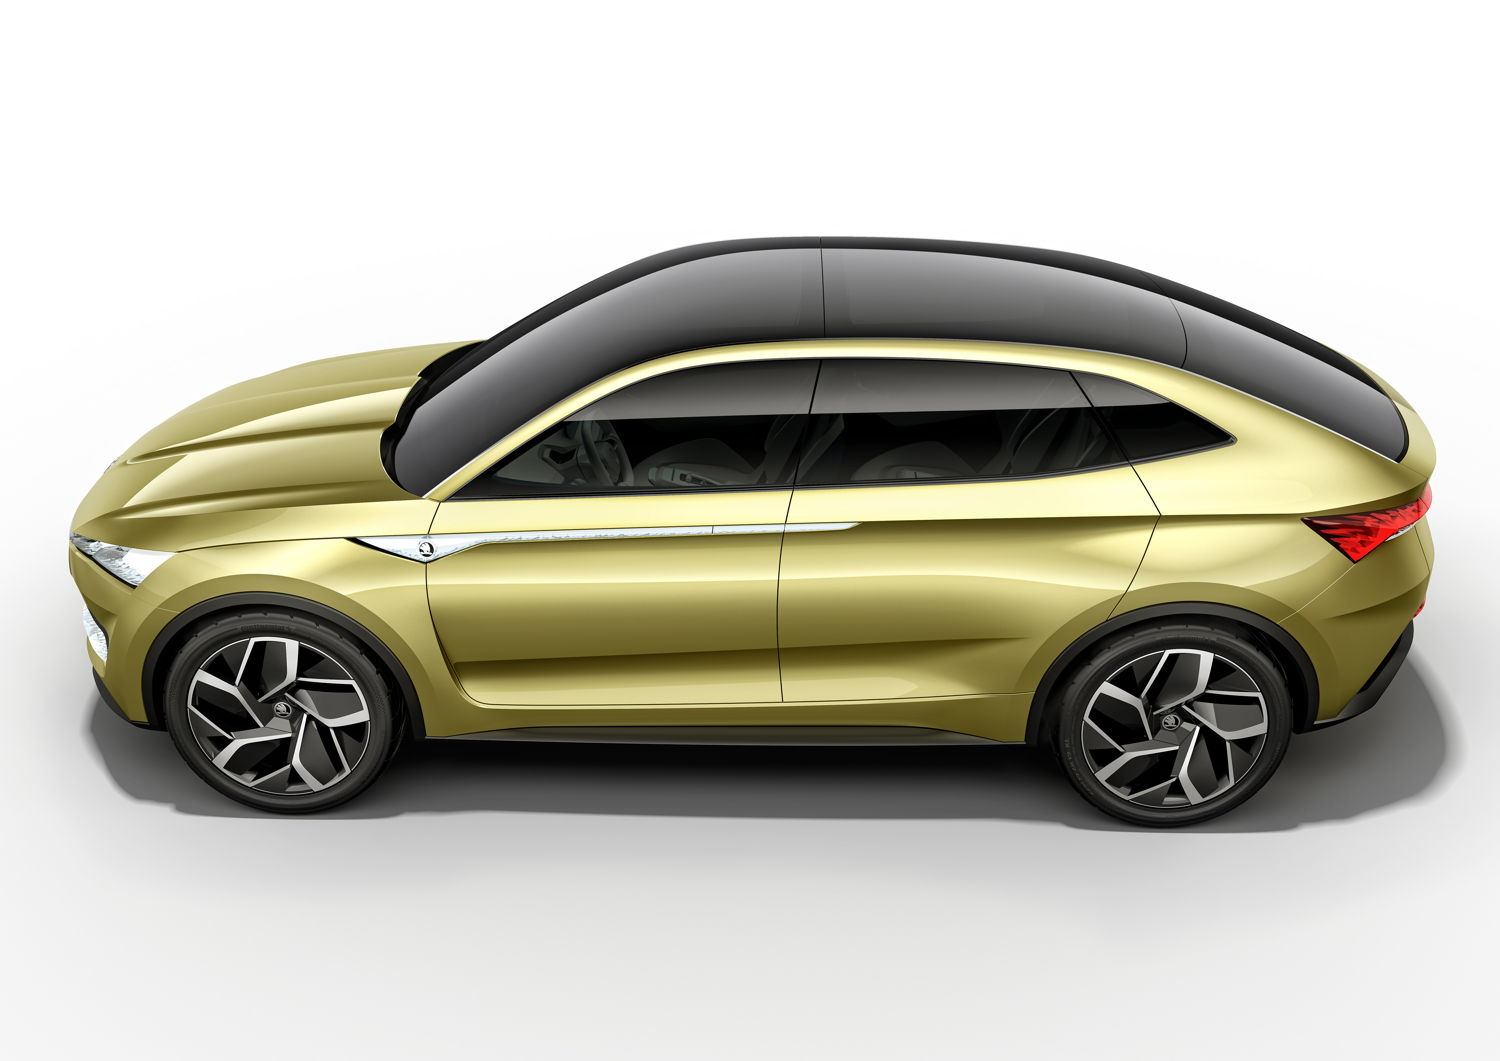 The future-oriented car combines an SUV-style raised seating position and a hatchback's generous amount of space with a dynamic silhouette and a gently sloping roofline, in the style of a coupé.